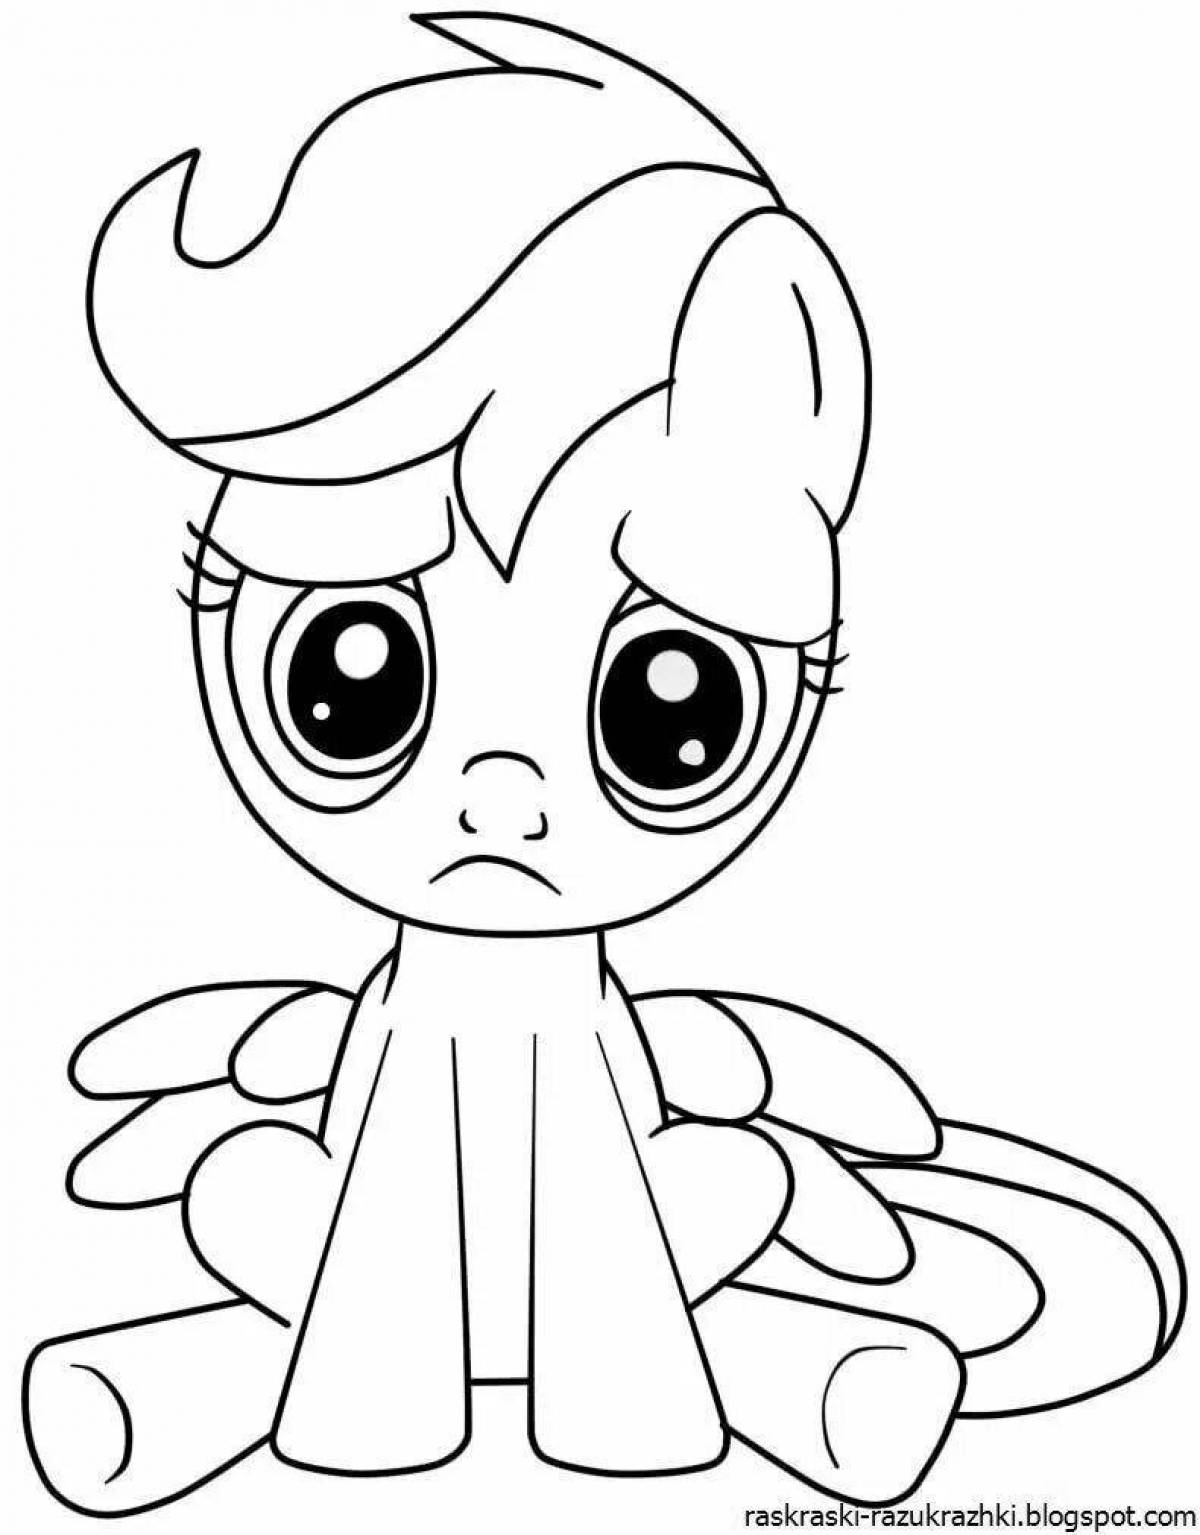 Fun pony coloring for kids